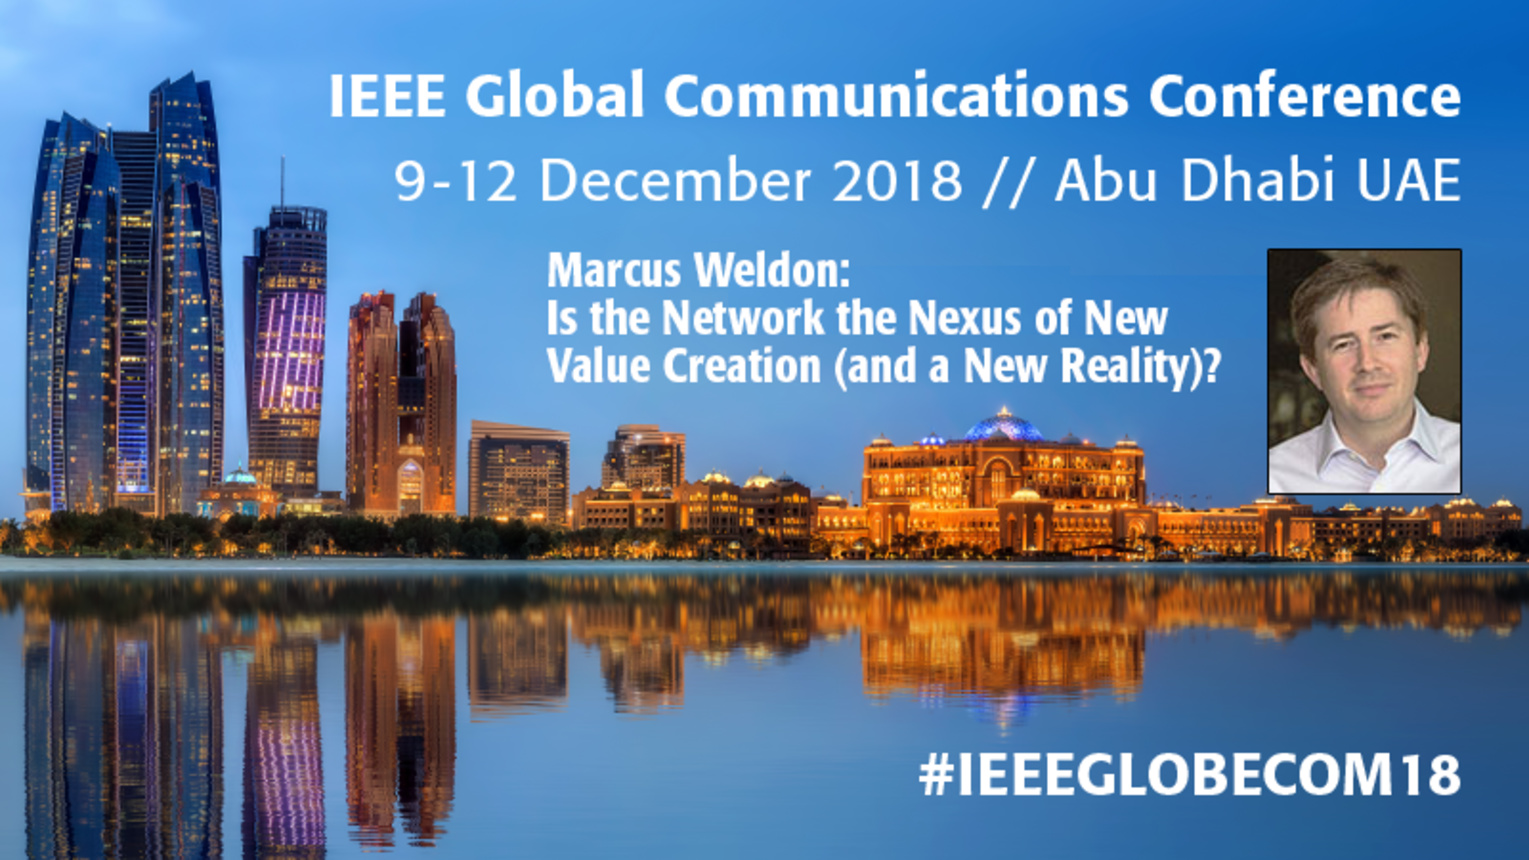 Is the Network the Nexus of New Value Creation (and a New Reality)? - Marcus Weldon at IEEE GLOBECOM 2018